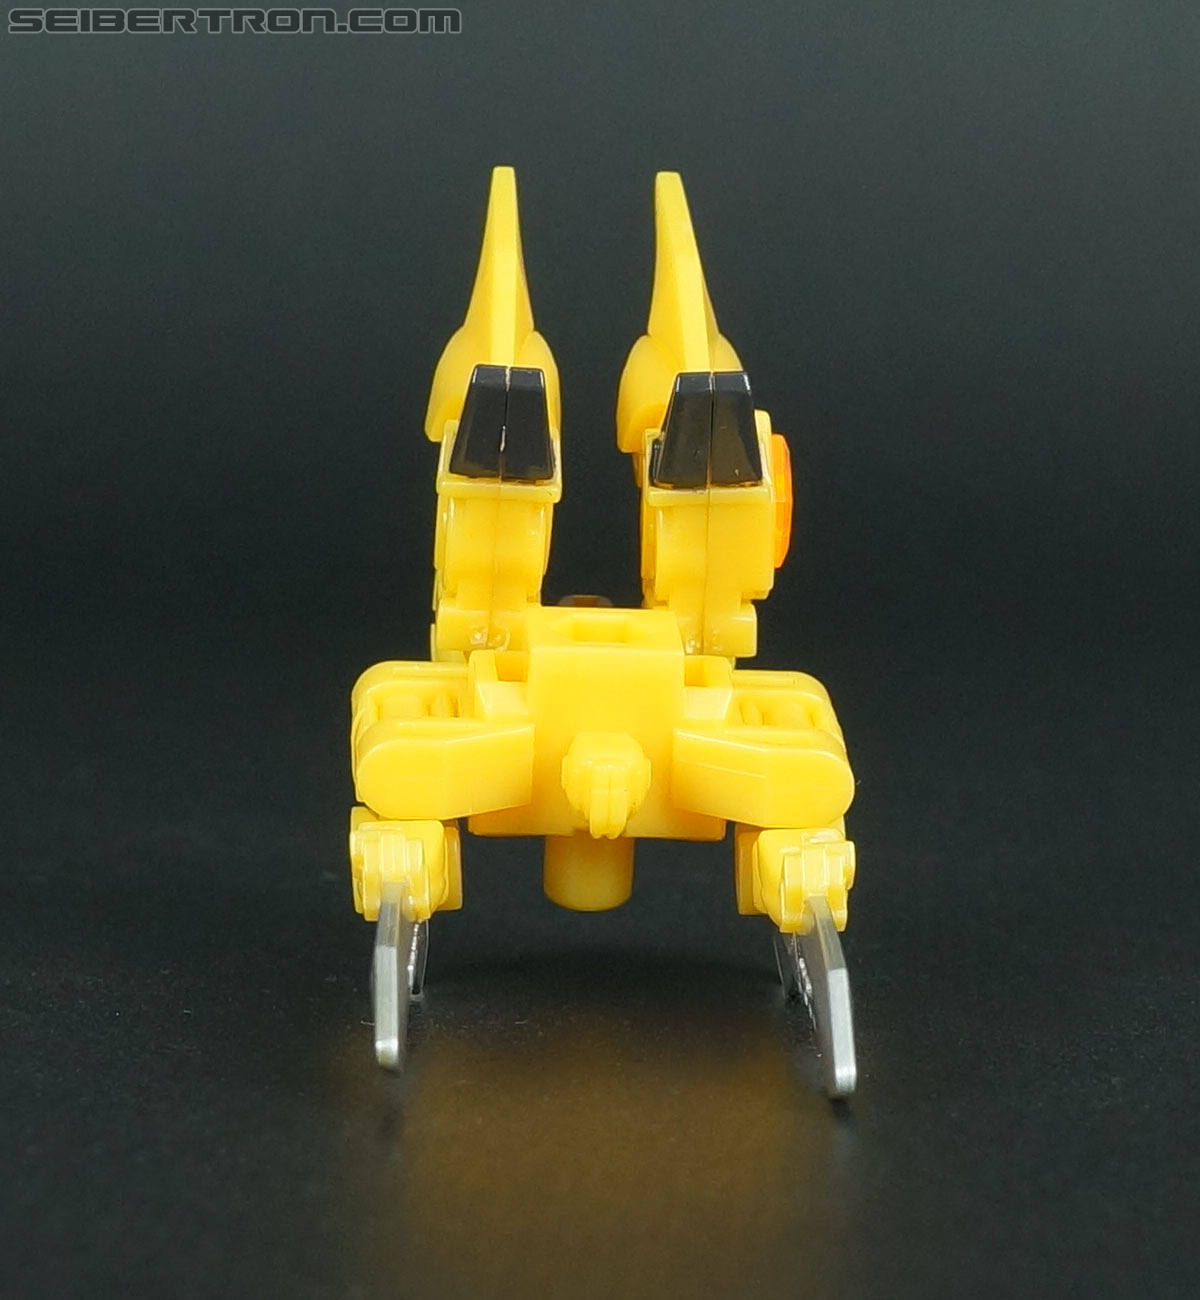 Transformers Arms Micron Bumblebee Sword (Image #55 of 75)